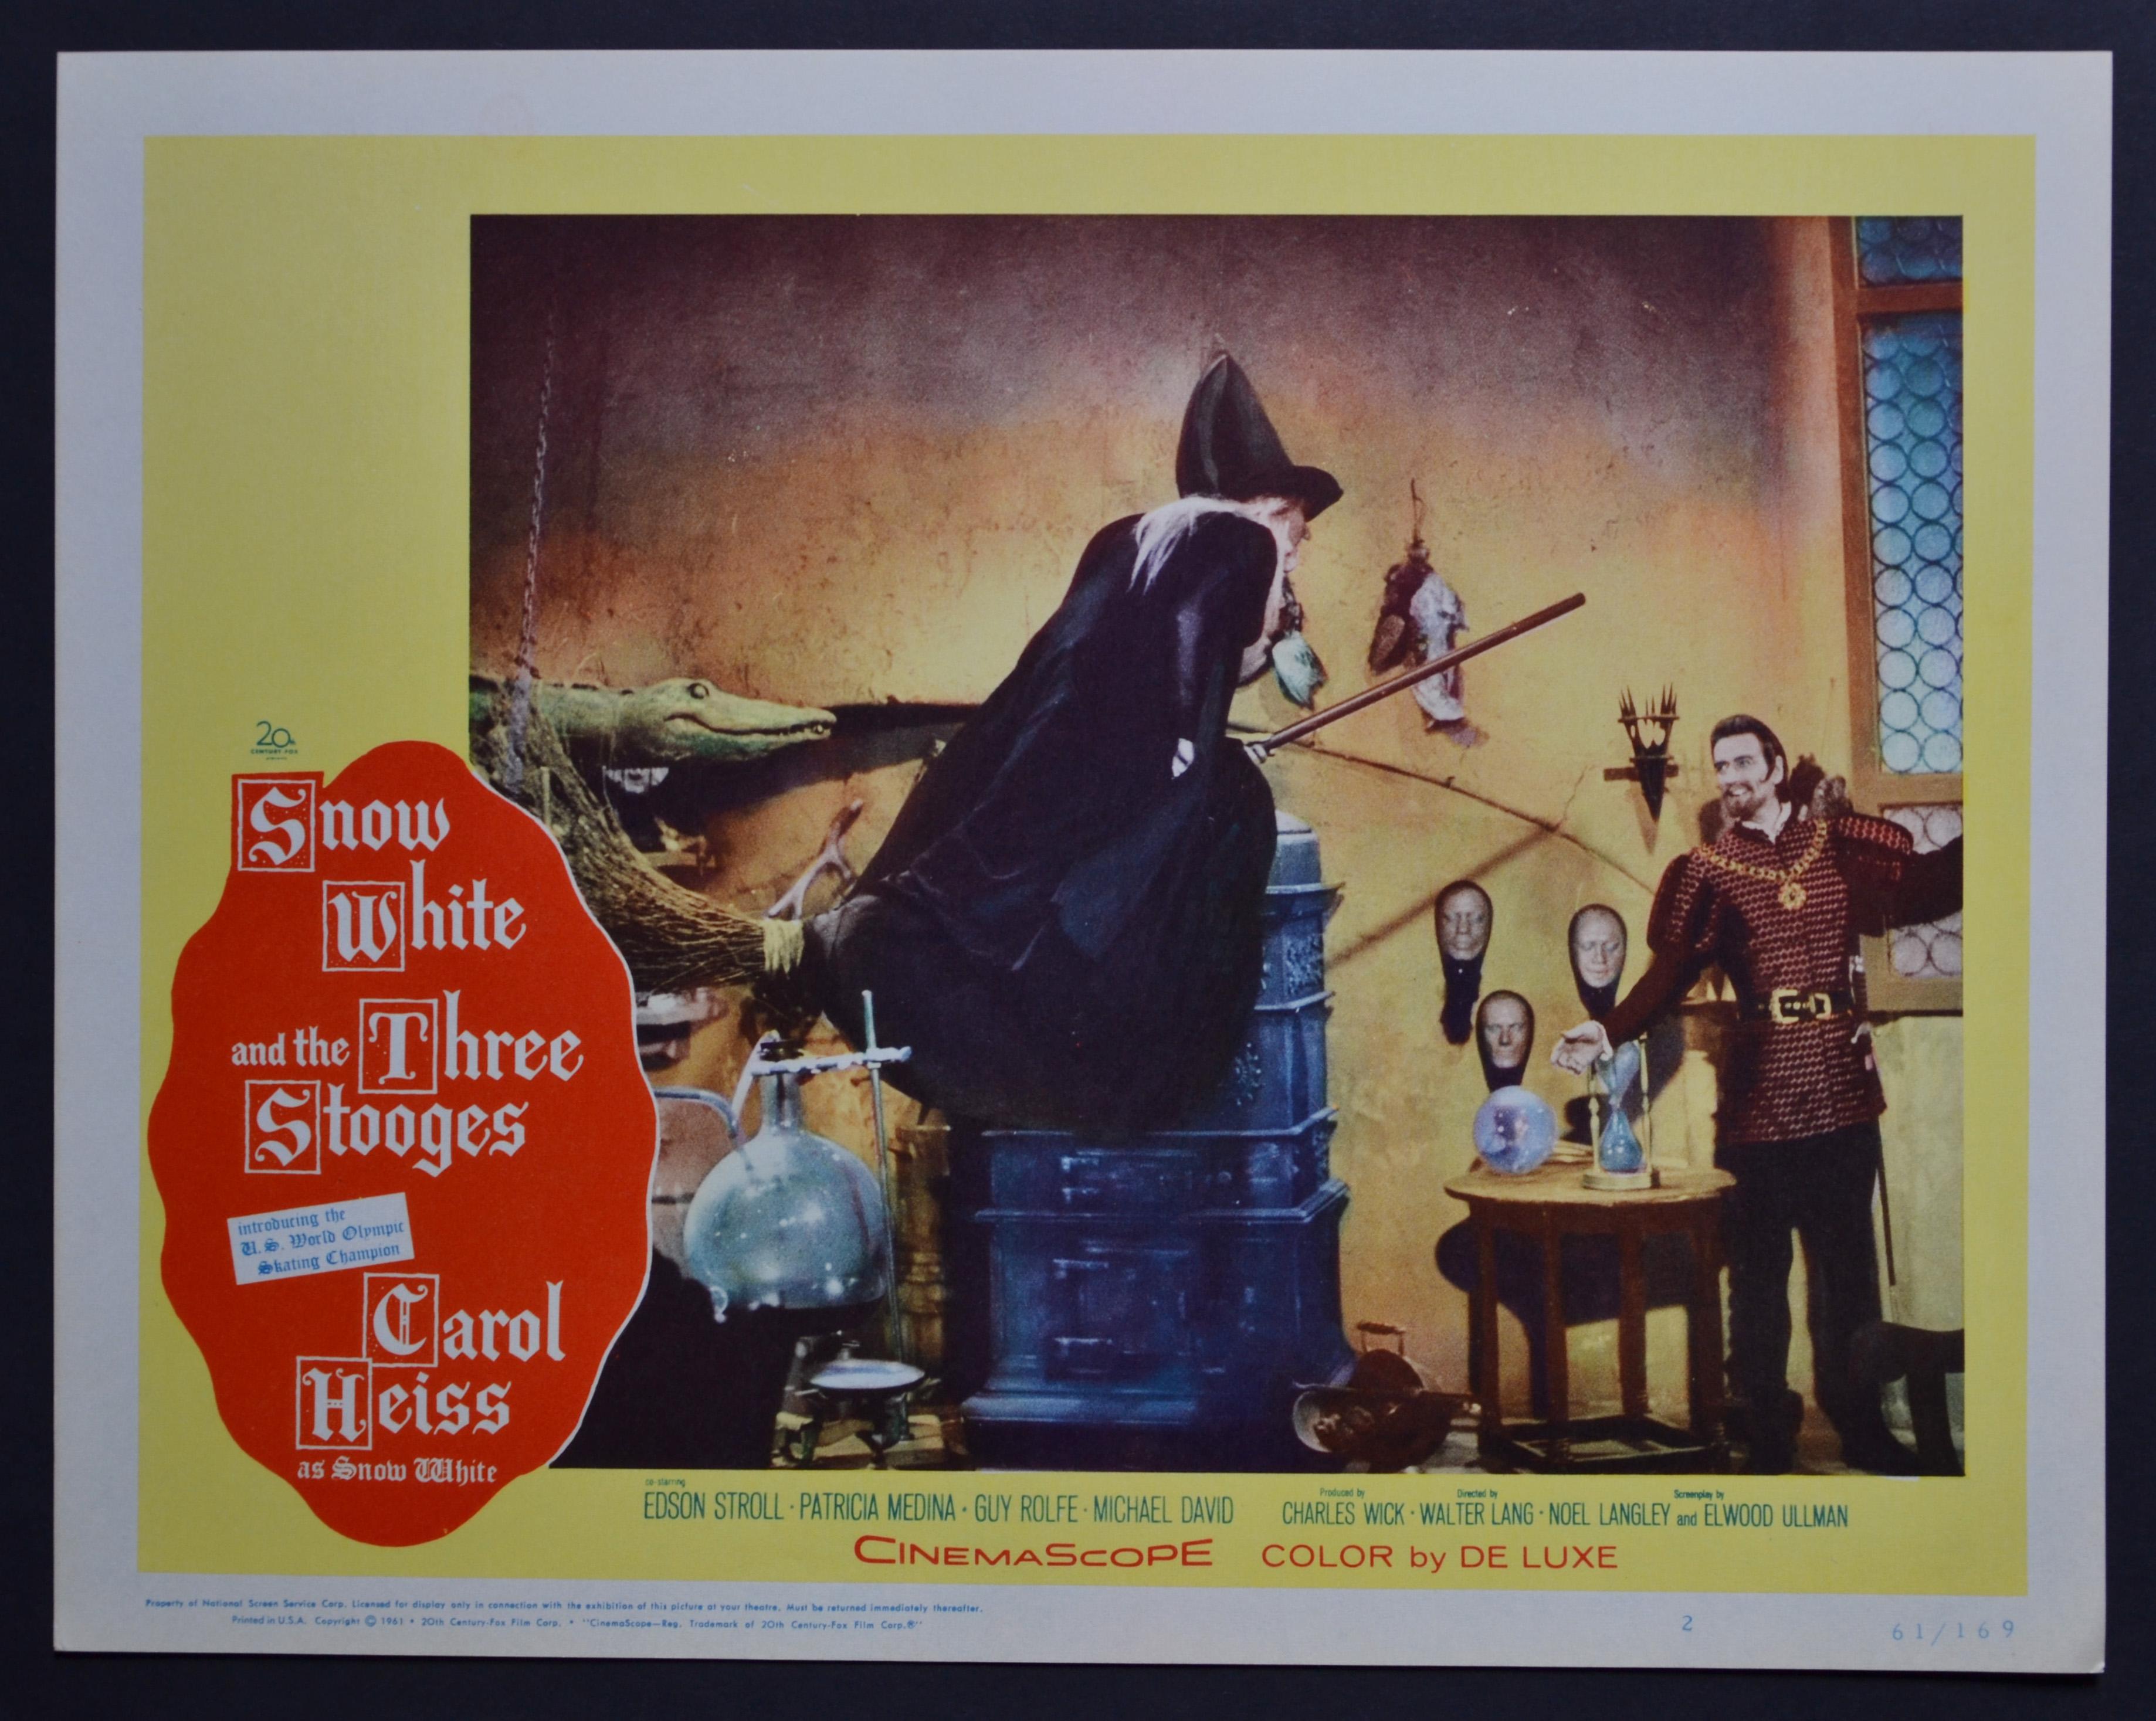 Unknown Interior Print - „Snow White and the Three Stooges“ Original Lobby Card of the Movie, USA 1961.